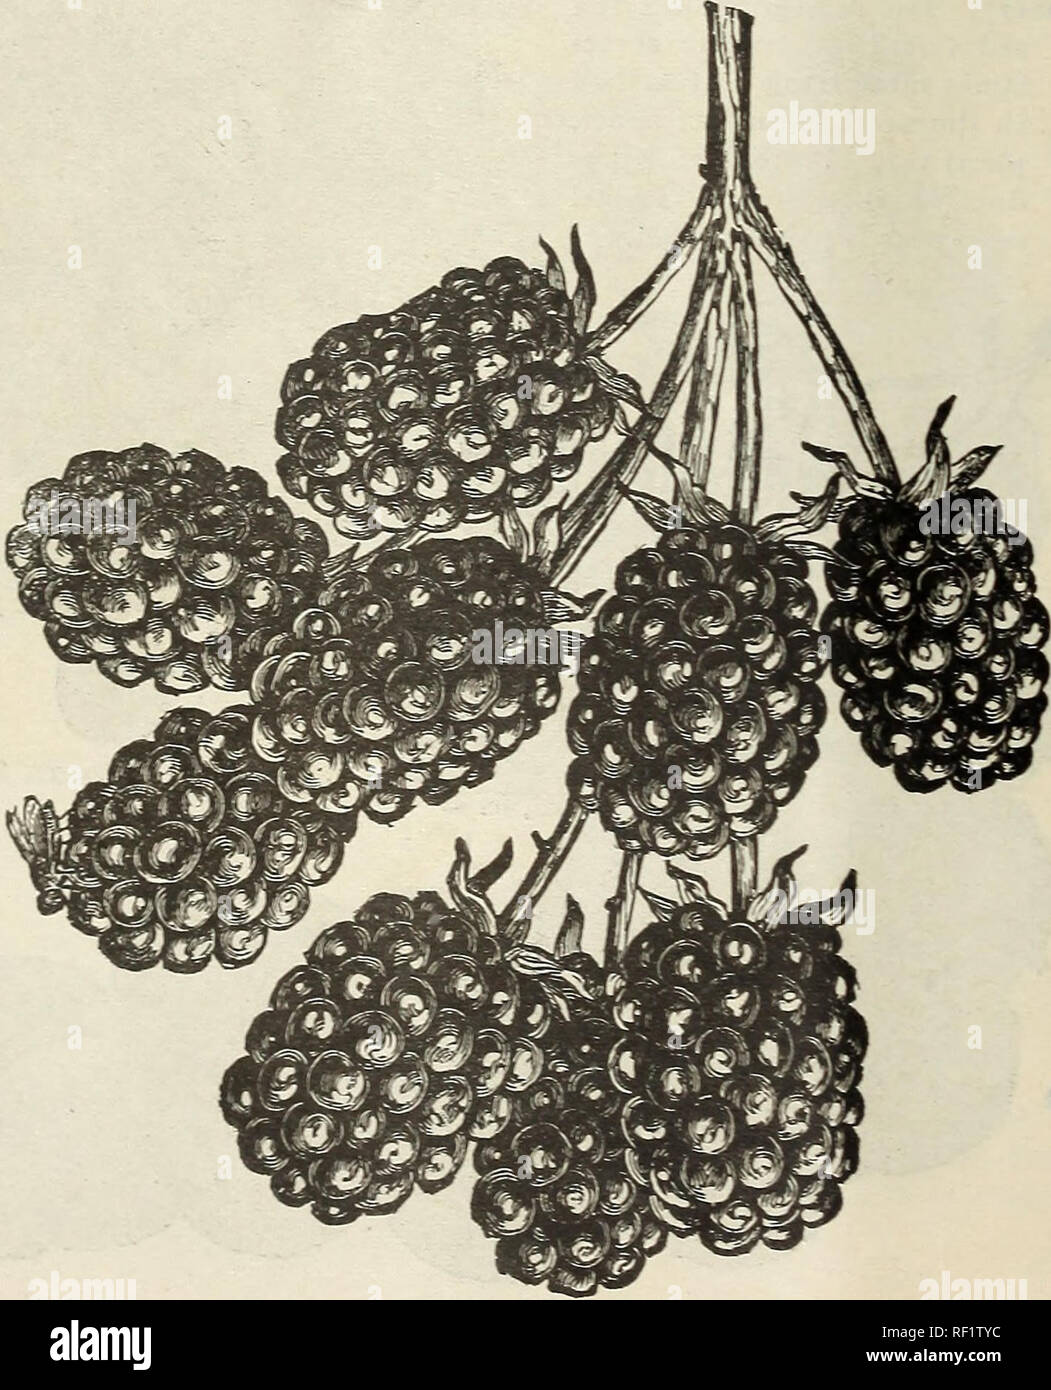 . Catalogue of fruit and ornamental trees : grape vines, small fruits, shrubs, plants, roses, etc.. Nurseries (Horticulture) Indiana Vincennes Catalogs; Fruit trees Seedlings Catalogs; Fruit Catalogs; Plants, Ornamental Catalogs. Â«0 ILLrSTRATED .IXD DESCRIPTIVE CATAIOGUE *f randall. A native black seedling- of the Western Wild Currant, and much superior to any of the named varieties yet introduced; distinct from the European black varieties and without their strong: odor; wonderfully productive, a strong-, vigorous grower, usually producing a crop next year after planting, large size, )4 to i Stock Photo